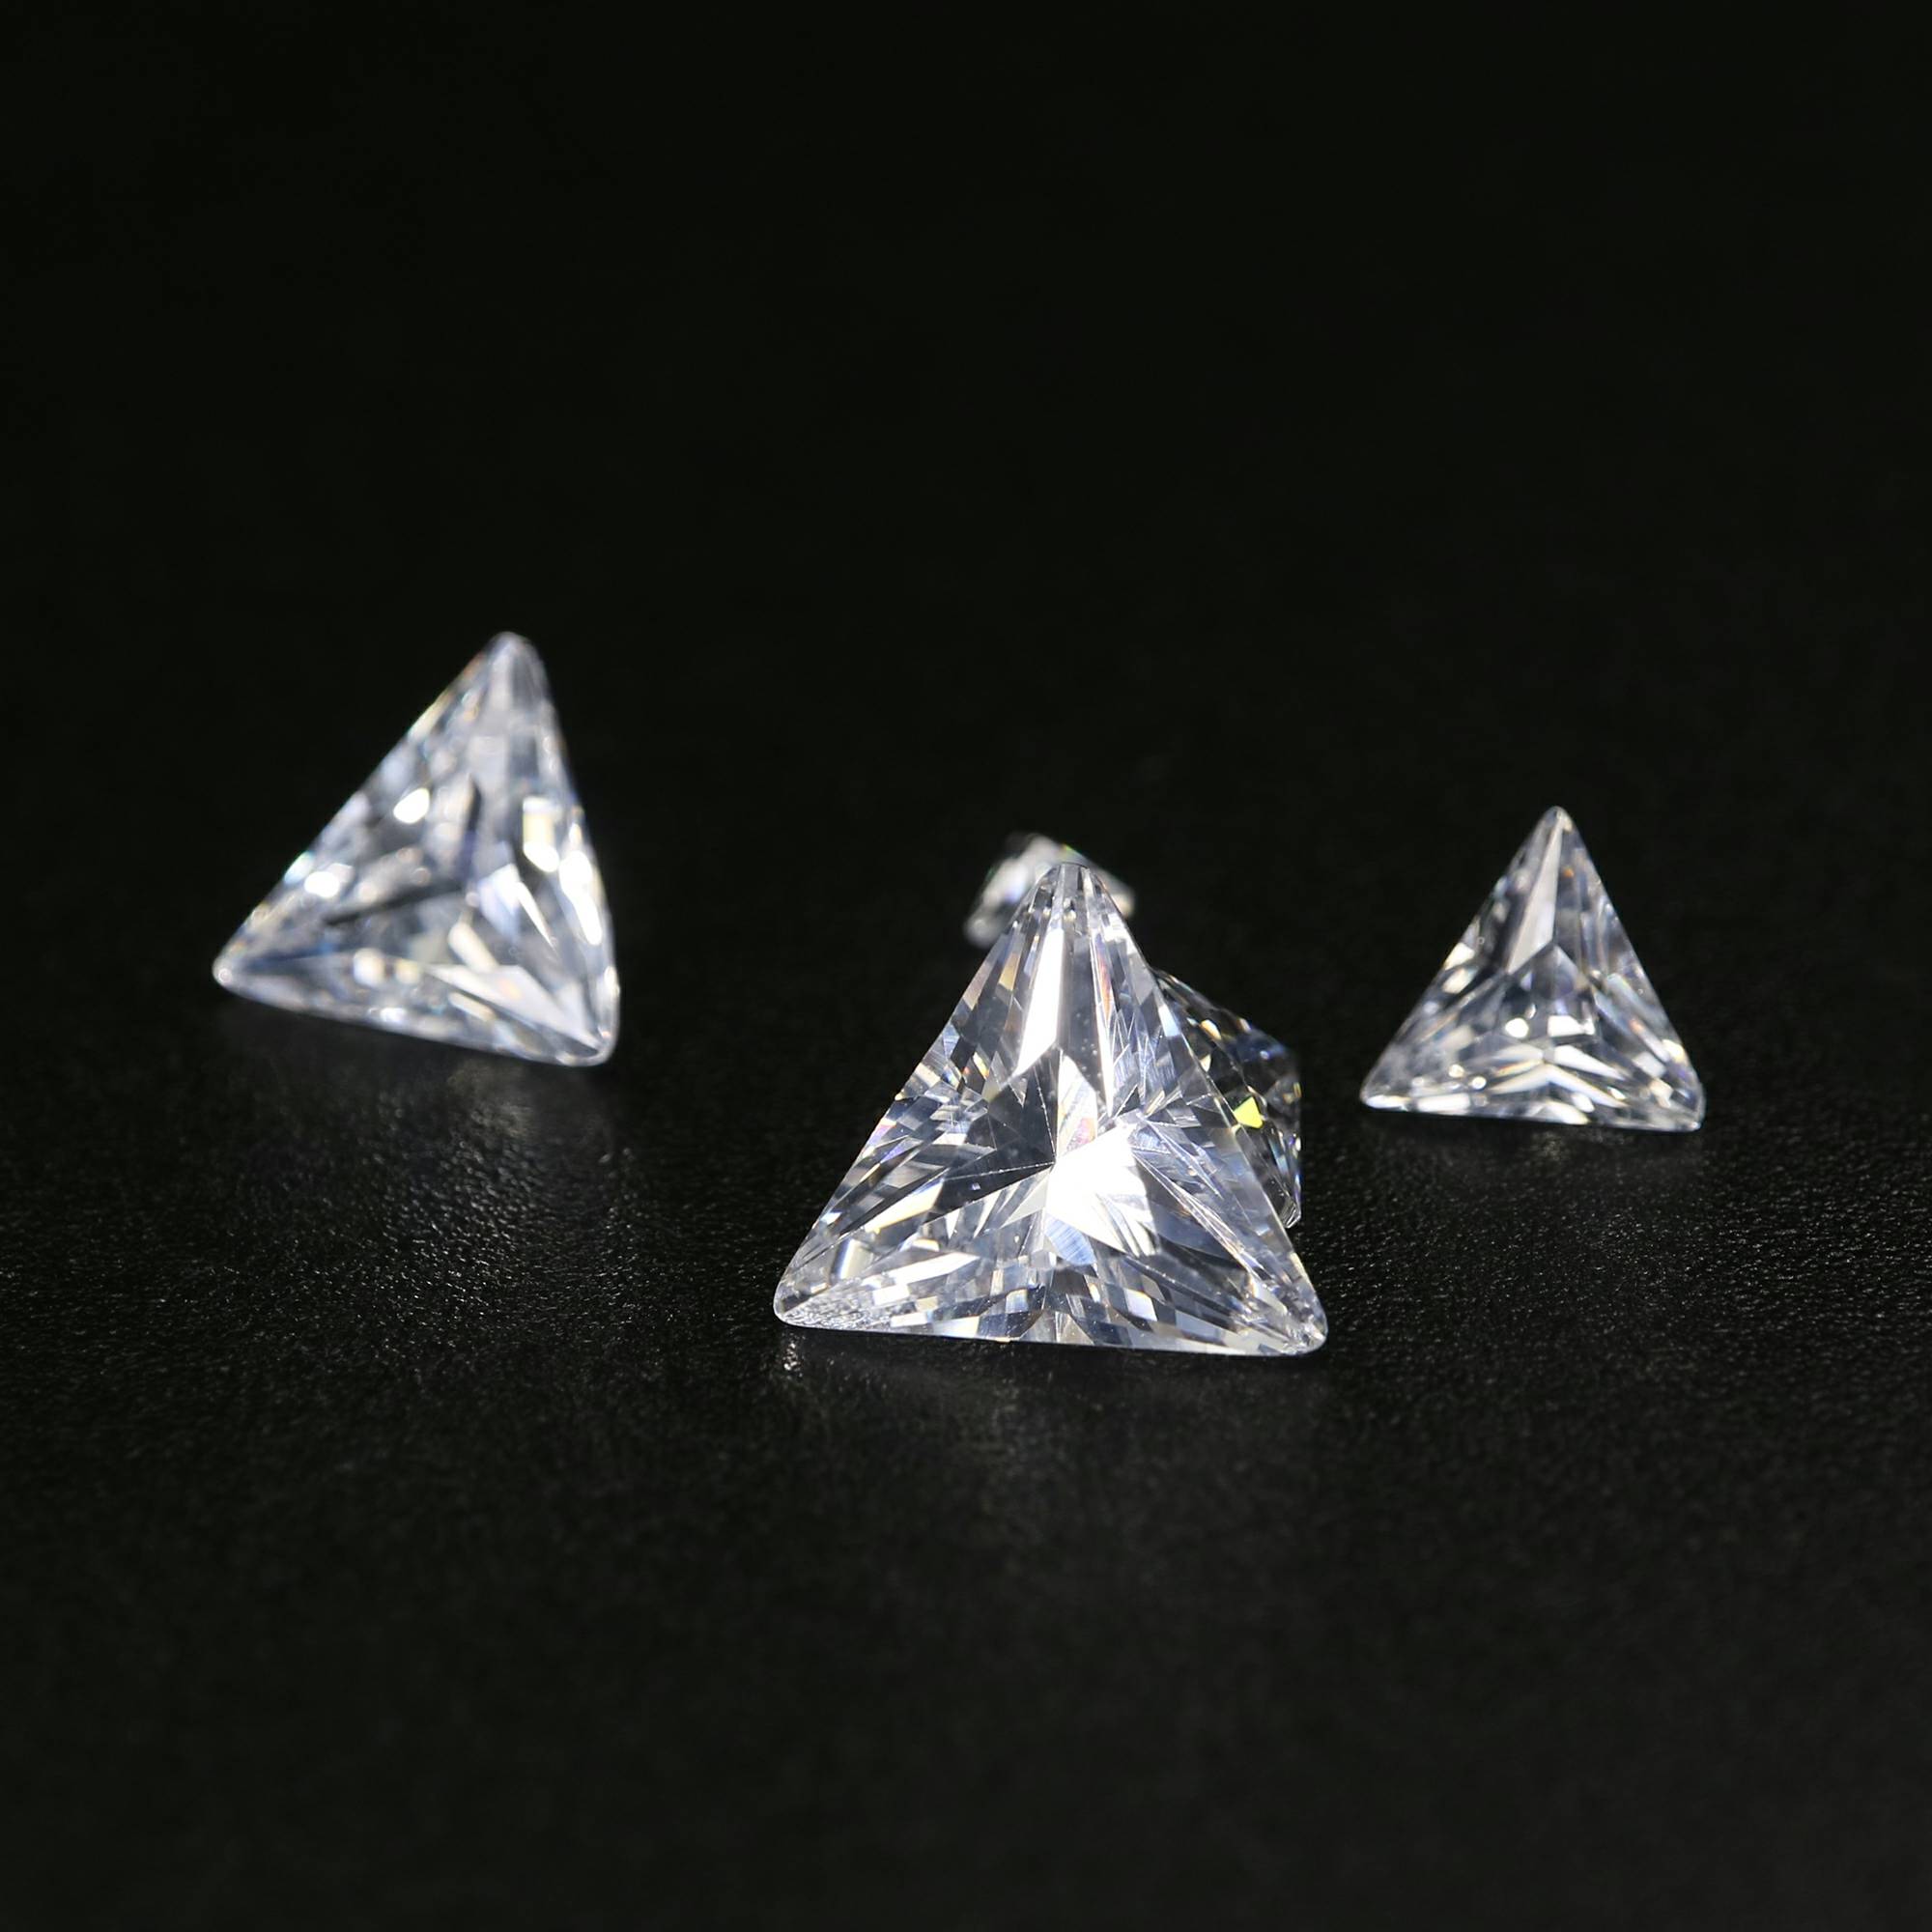 1Pcs Multiple Size Triangle Shape Moissanite Stone Faceted Imitated Diamond Loose Gemstone for DIY Engagement Ring D Color VVS1 Excellent Cut 4160020 - Click Image to Close